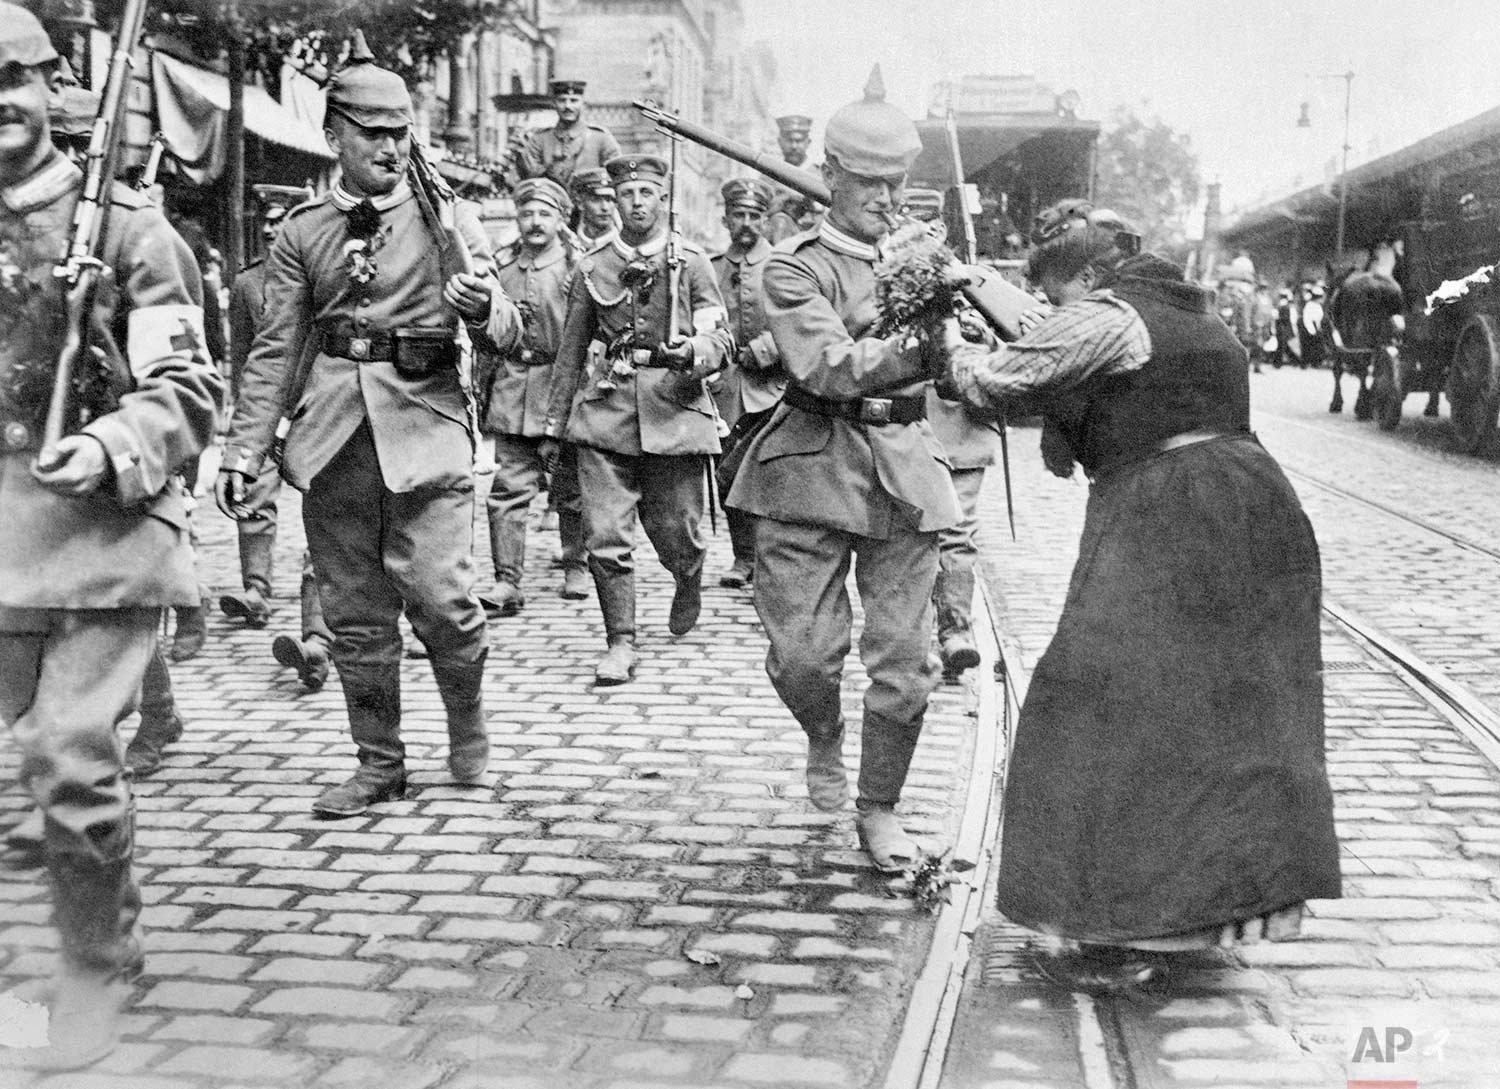  In this undated photo, Prussian soldiers leaving Berlin for the front are given flowers by a woman during World War One. (AP Photo)
 